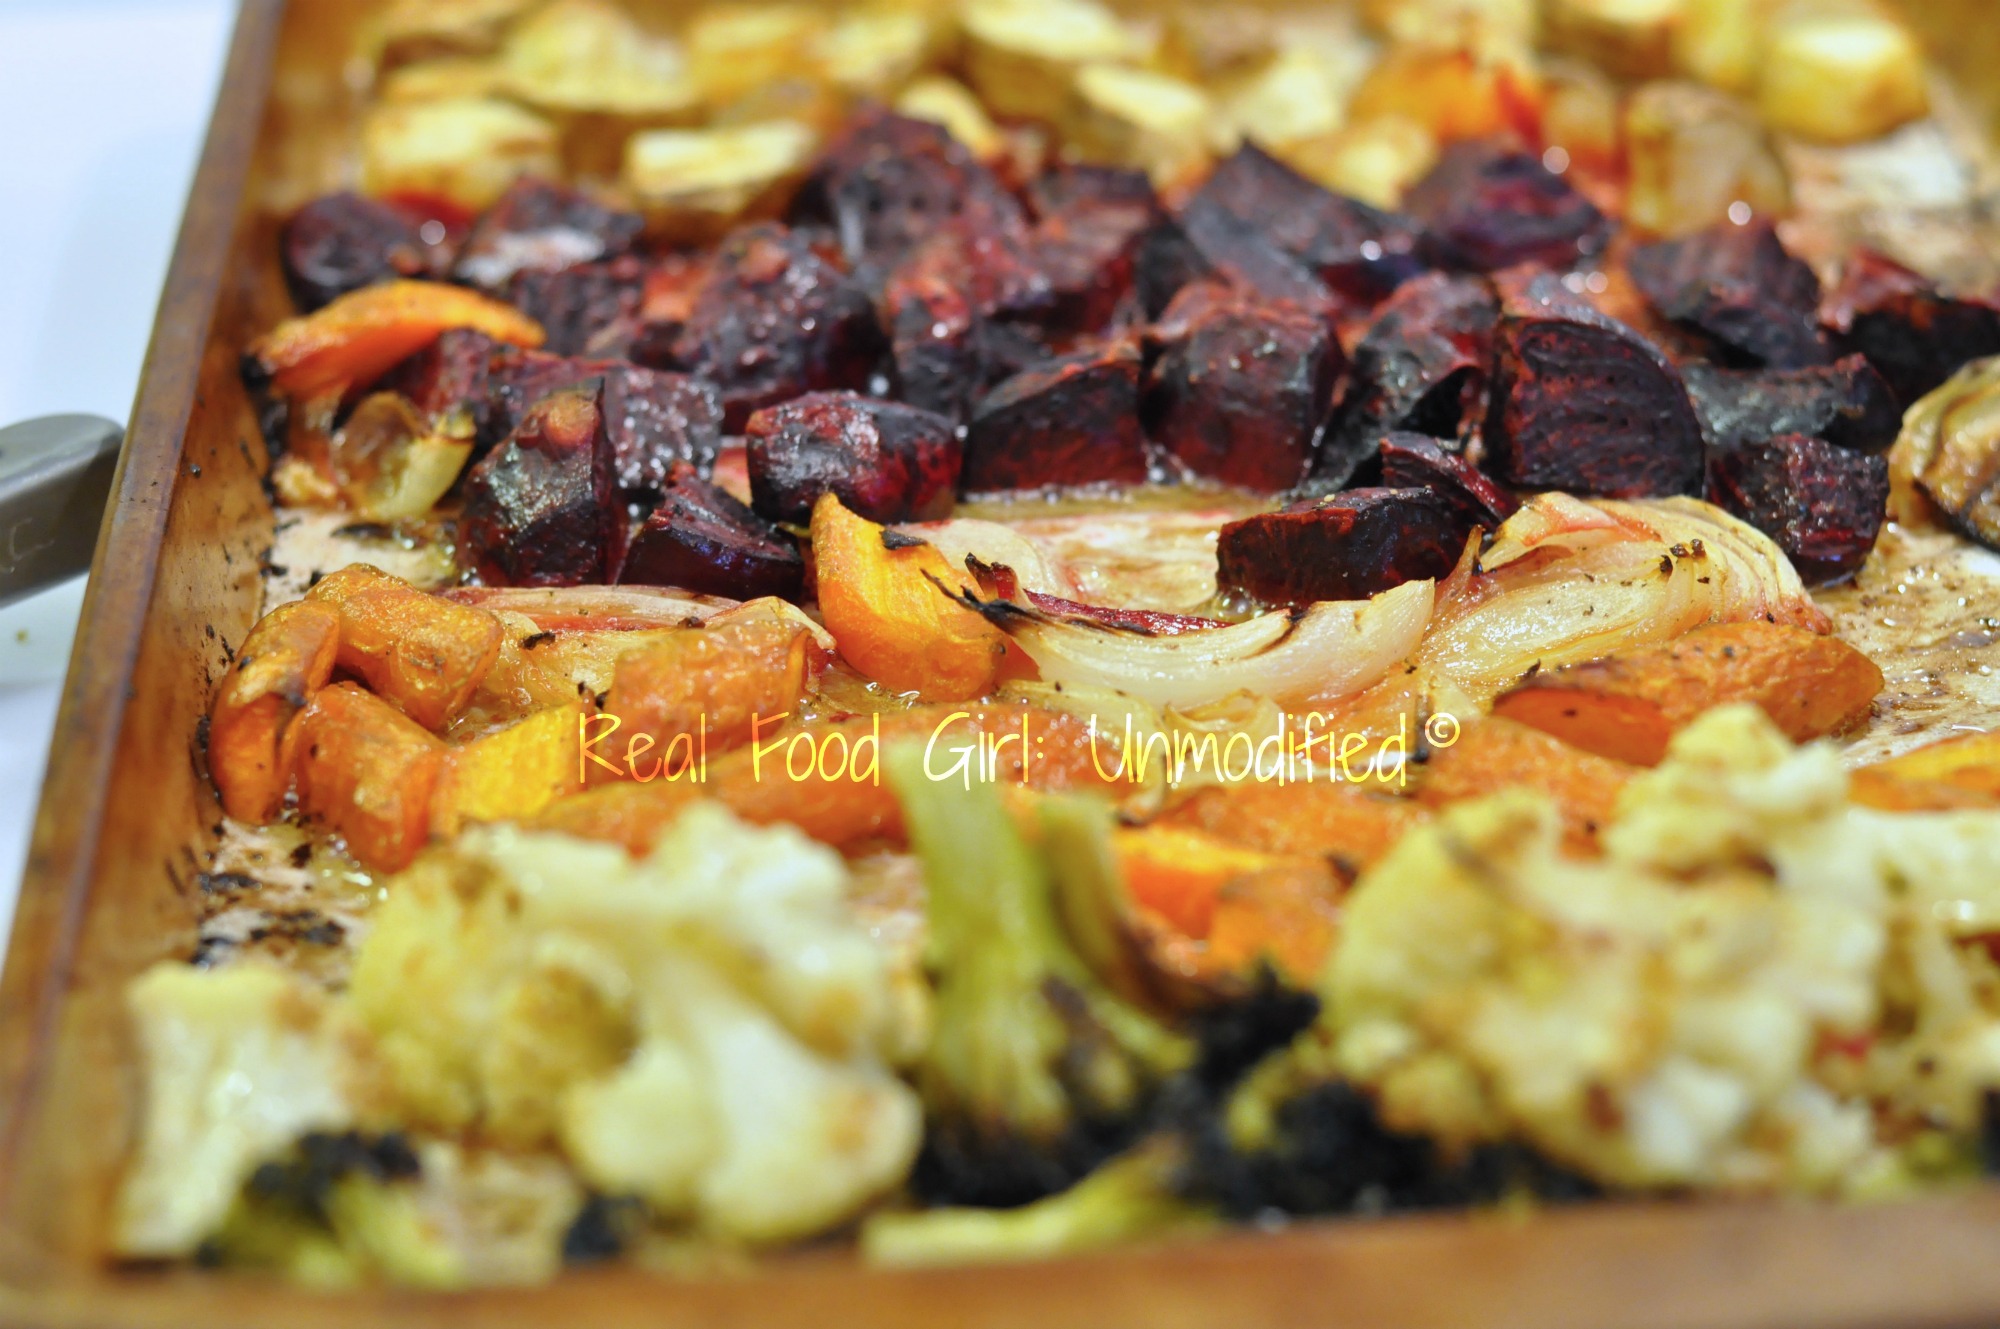 Organic roasted veggies. Look at the color! Real Food Girl: Unmodified